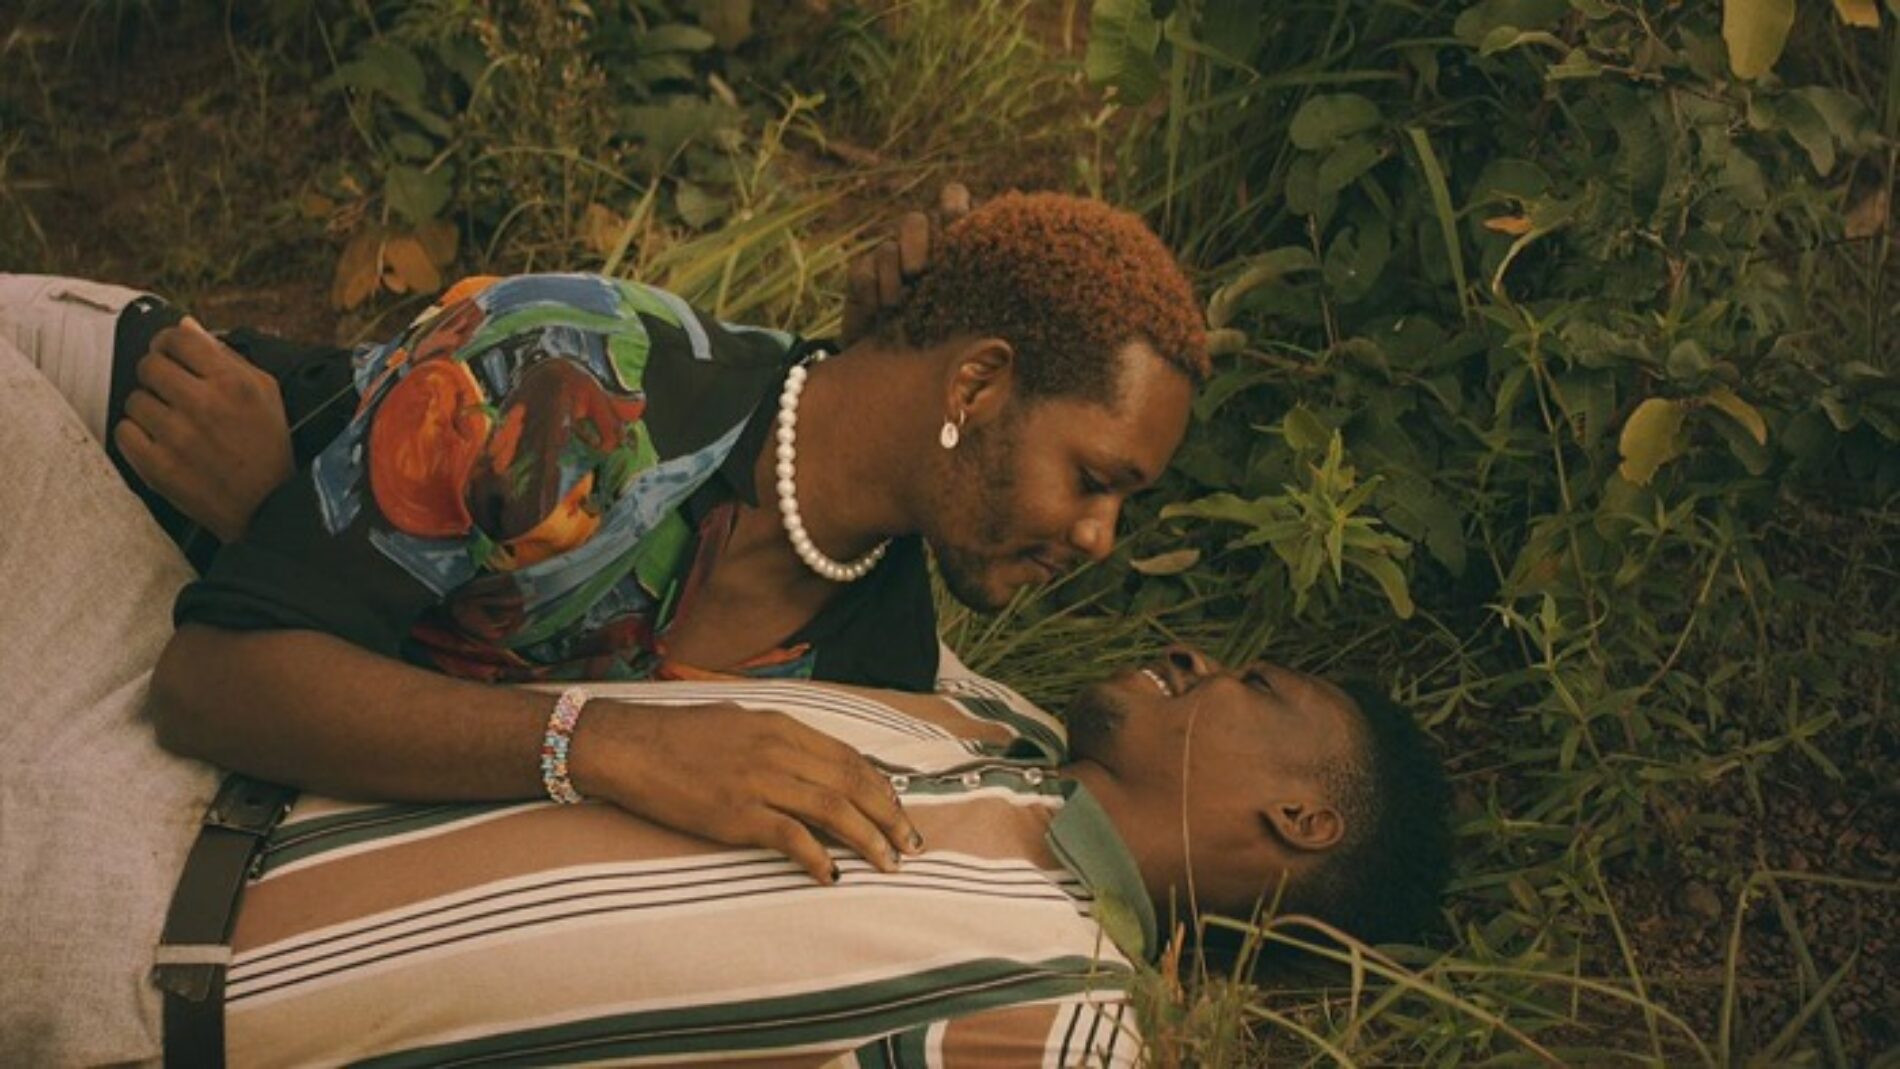 Upcoming Nigerian Film, ‘Country Love’, Explores The Queer Identity, Finding Peace And Self Love